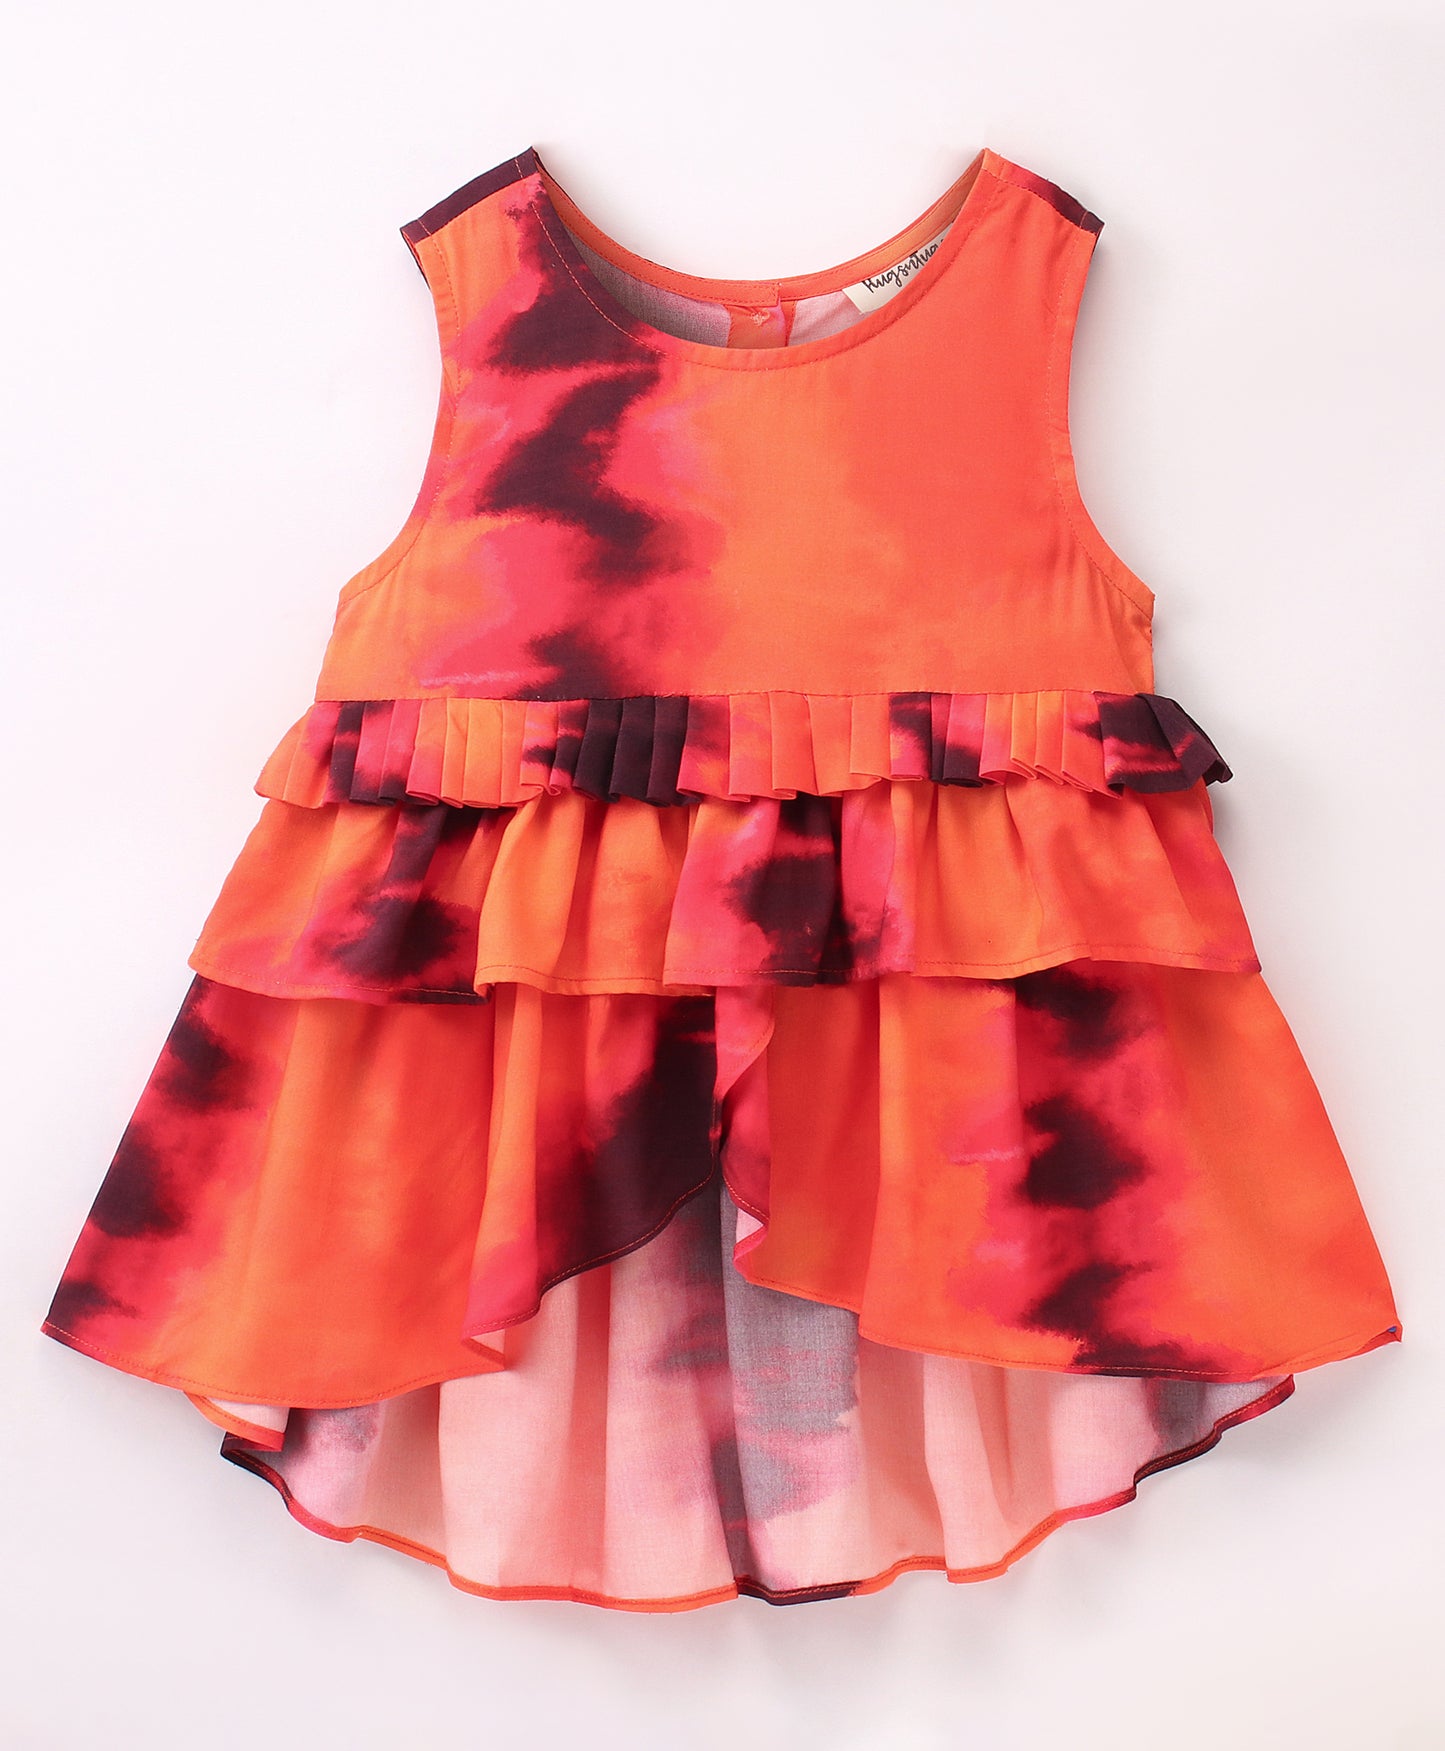 Sleevless All Over Tie & Dye Designed High Low Top With Pleats At Waist - Orange